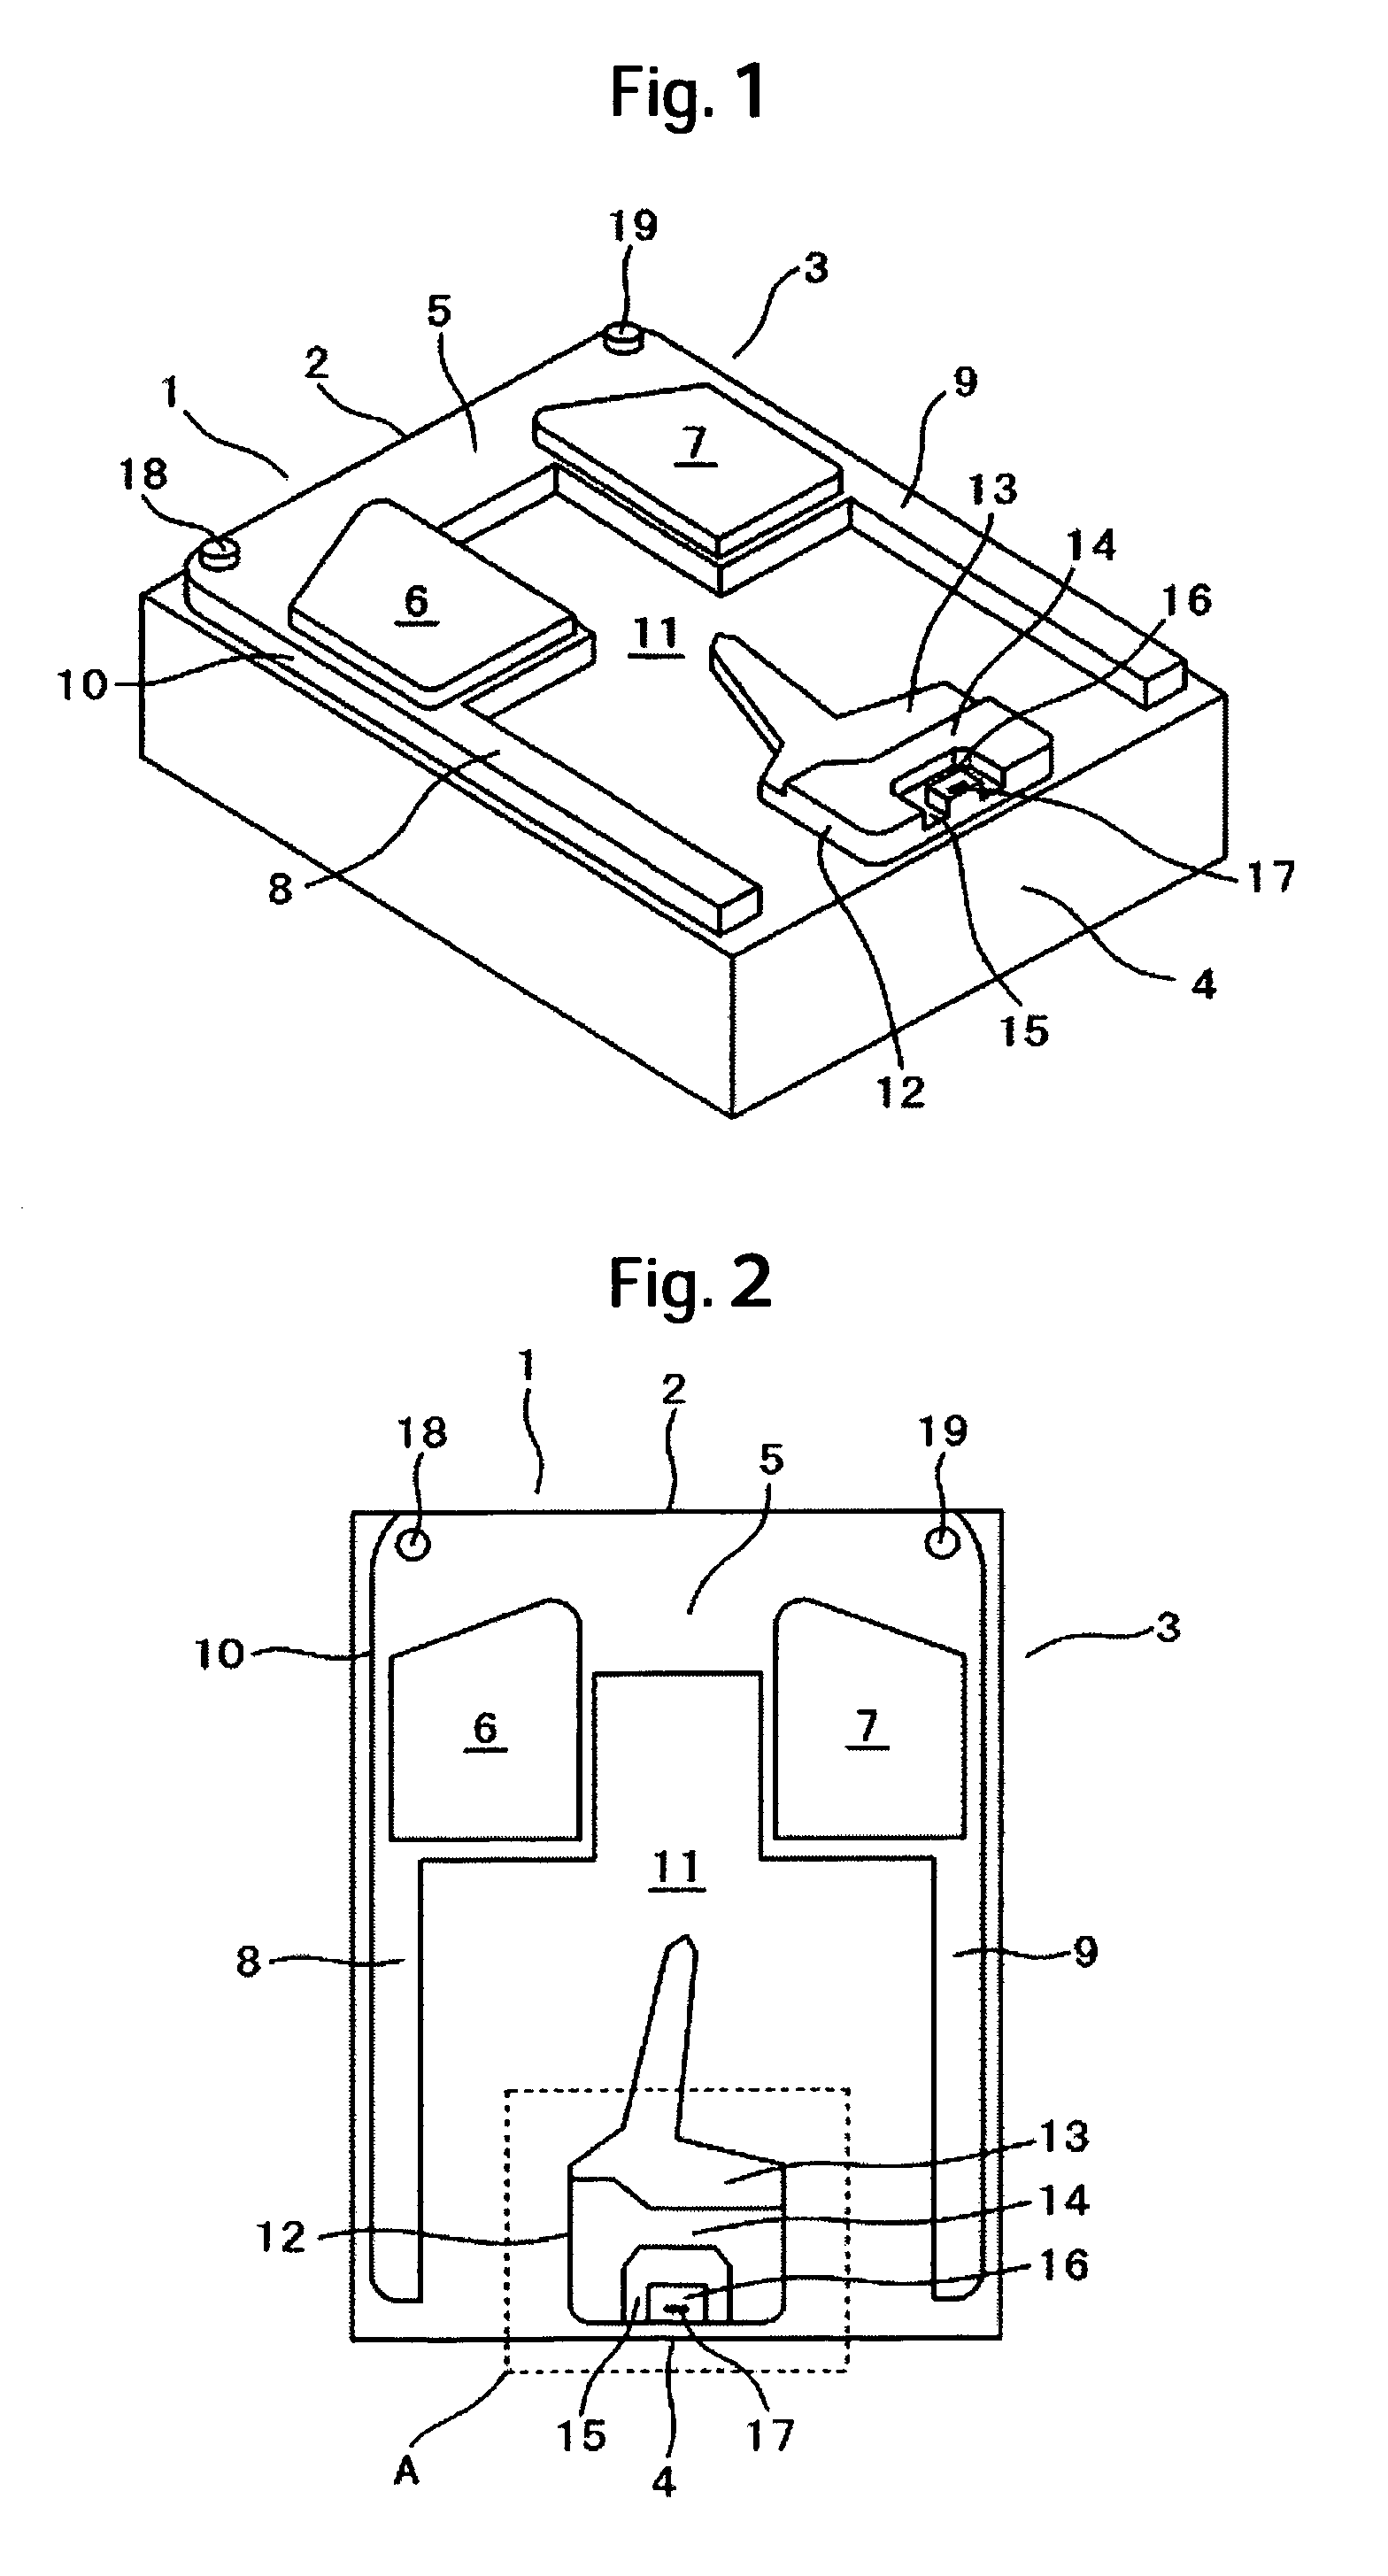 Magnetic head slider with trailing rail surface for flying height control